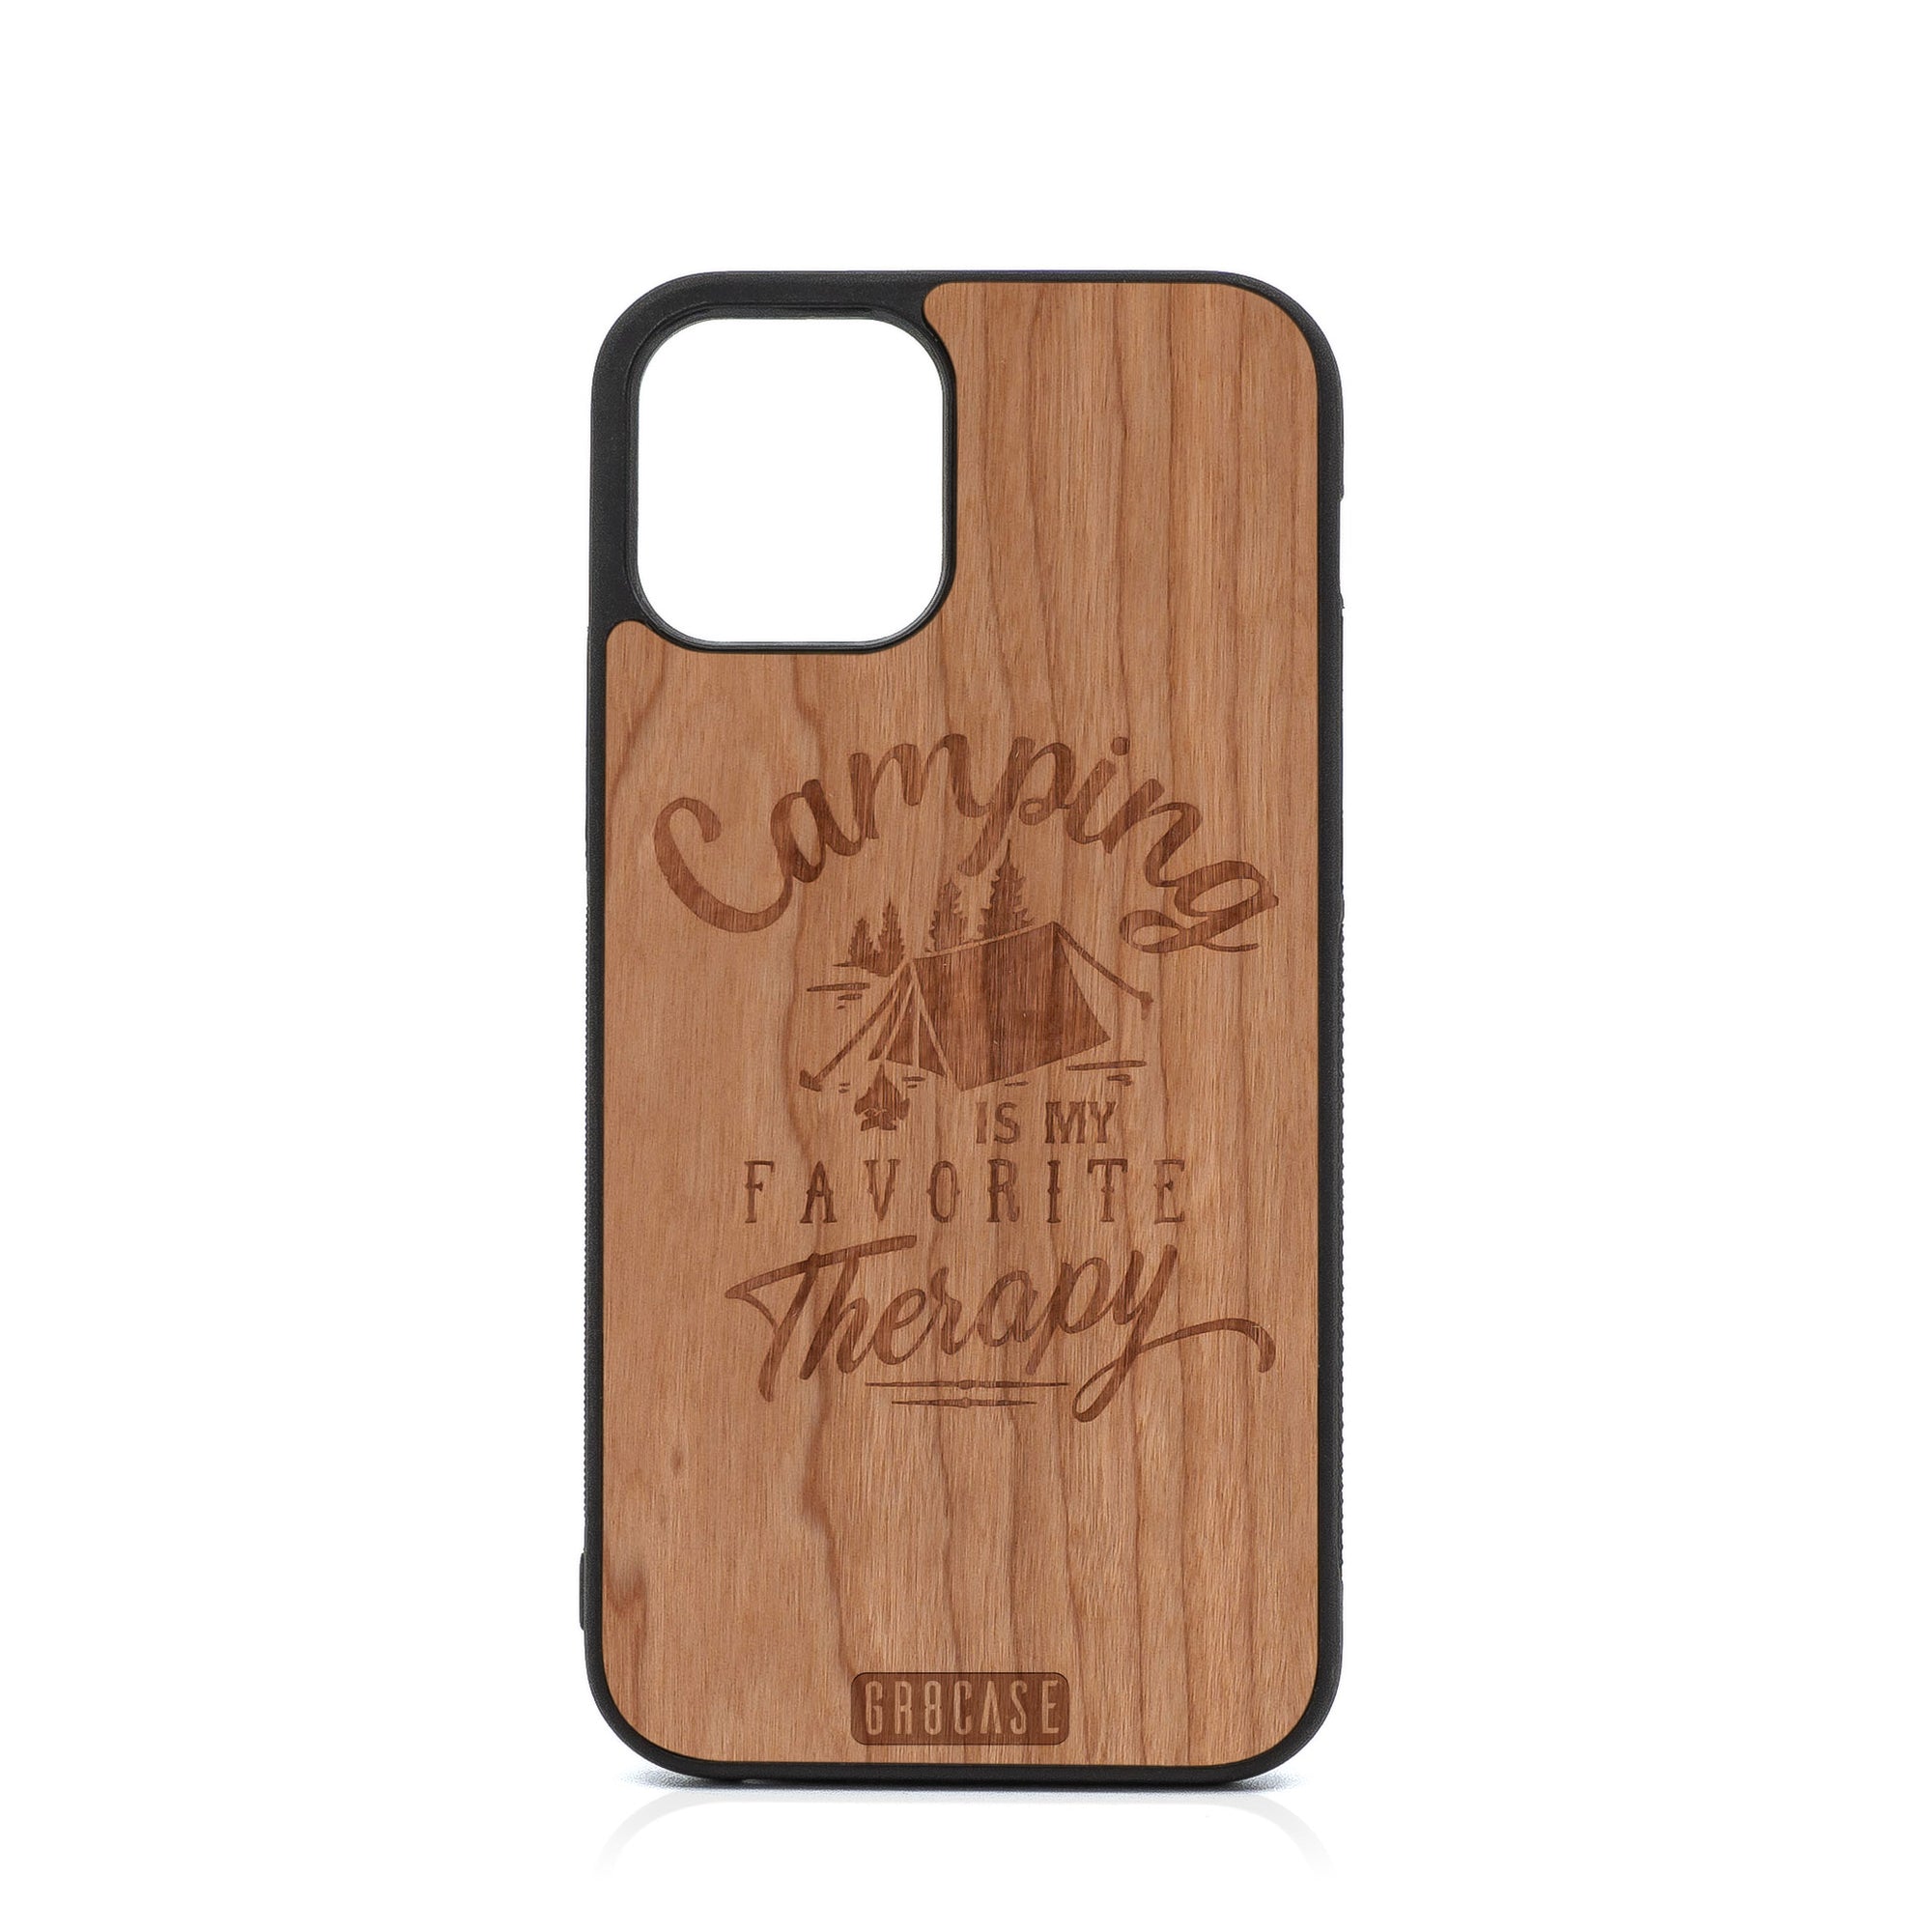 Camping Is My Favorite Therapy Design Wood Case For iPhone 12